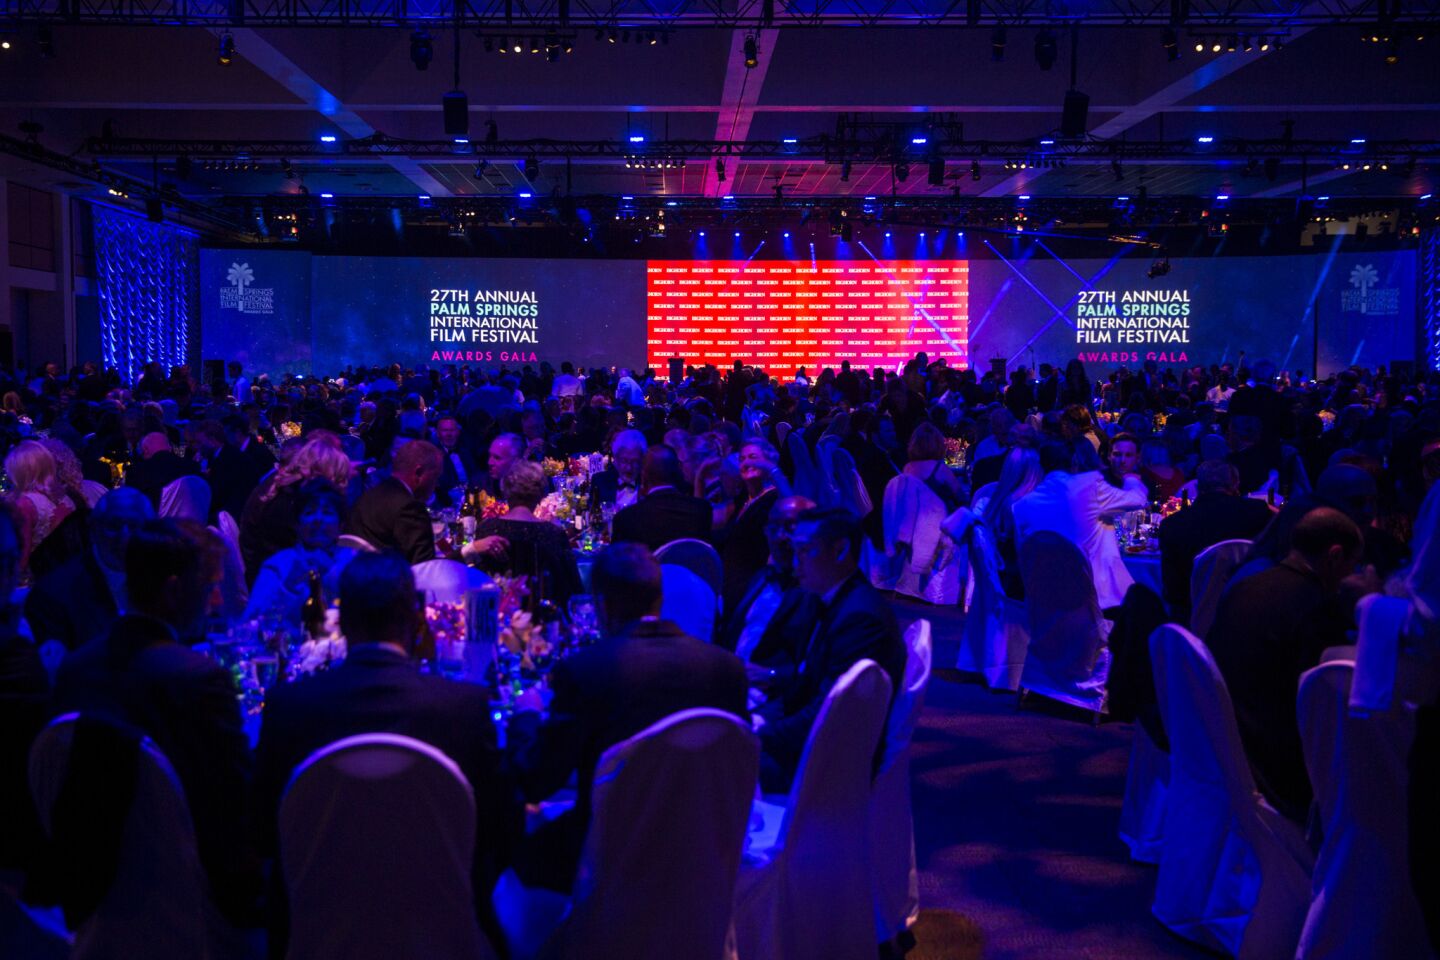 Inside the 2016 Palm Springs International Film Festival Awards Gala, which was held at at the Palm Springs Convention Center.